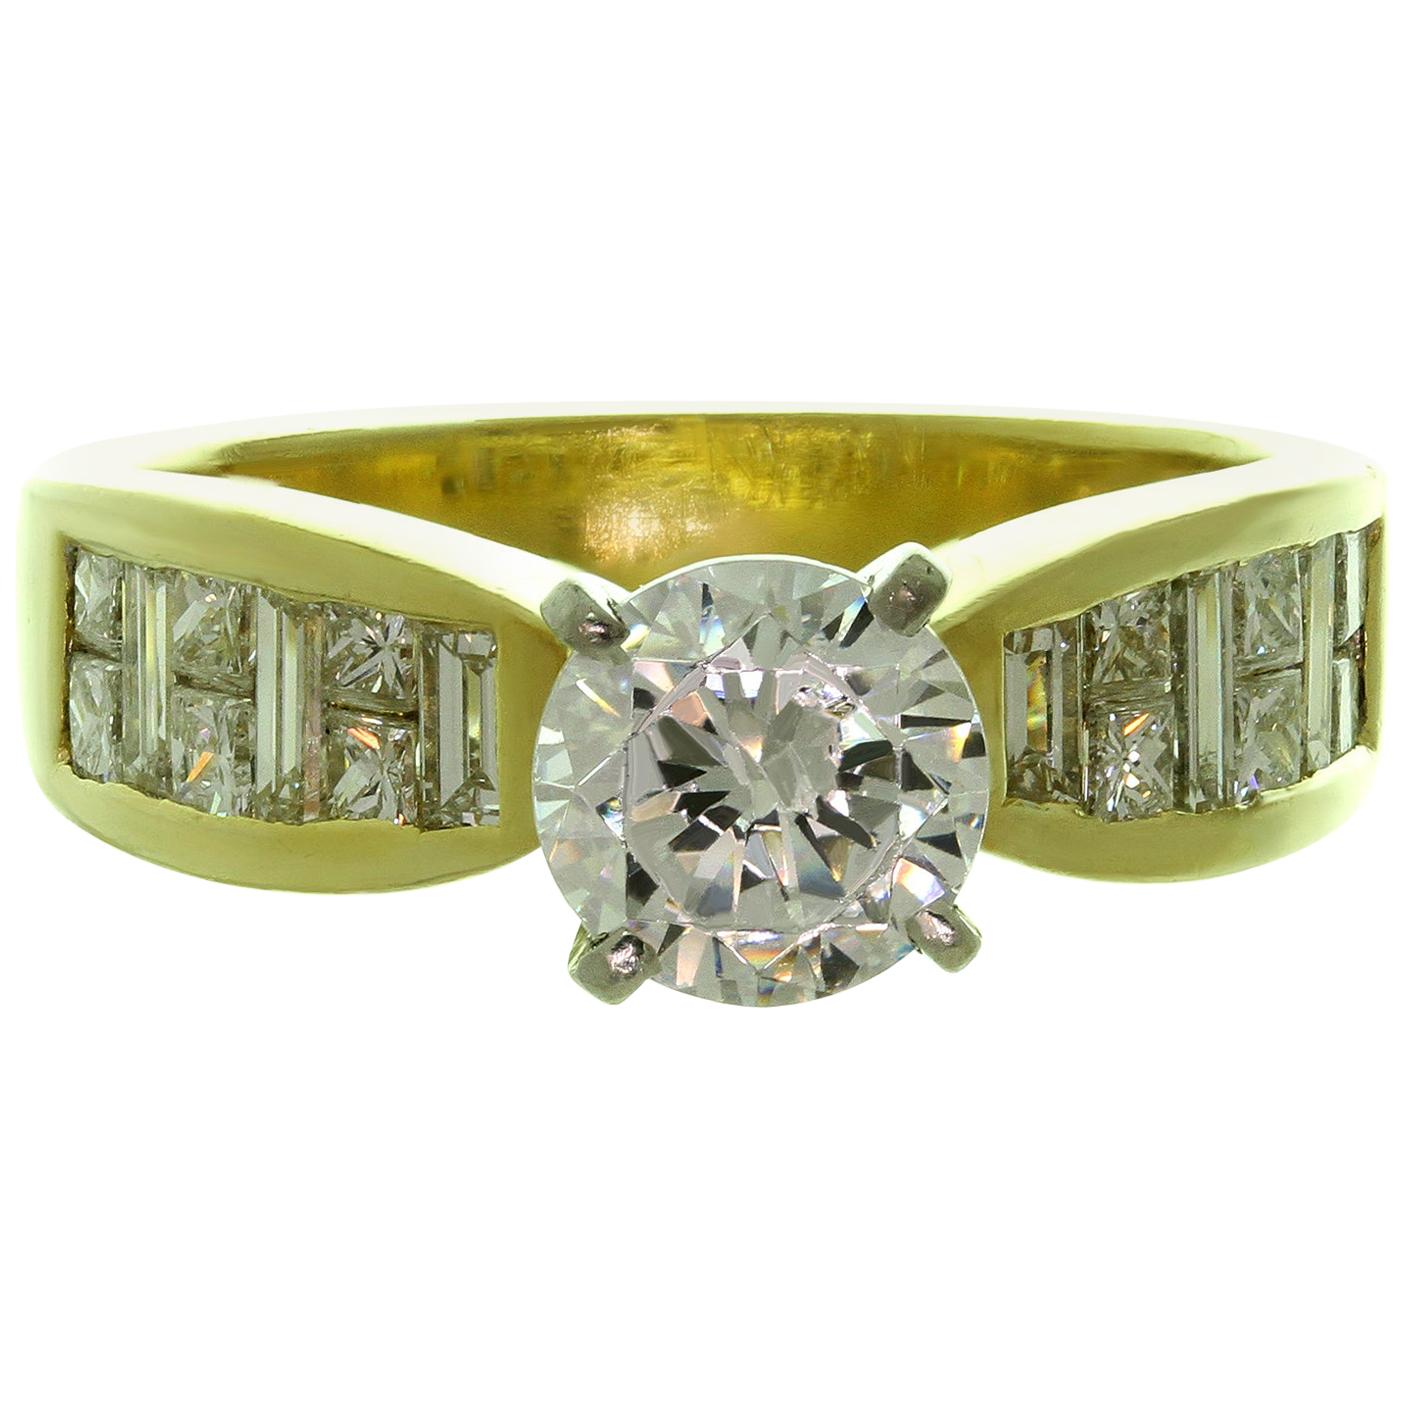 Fancy-Cut Diamond Zircon Yellow Gold Engagement Ring For Sale